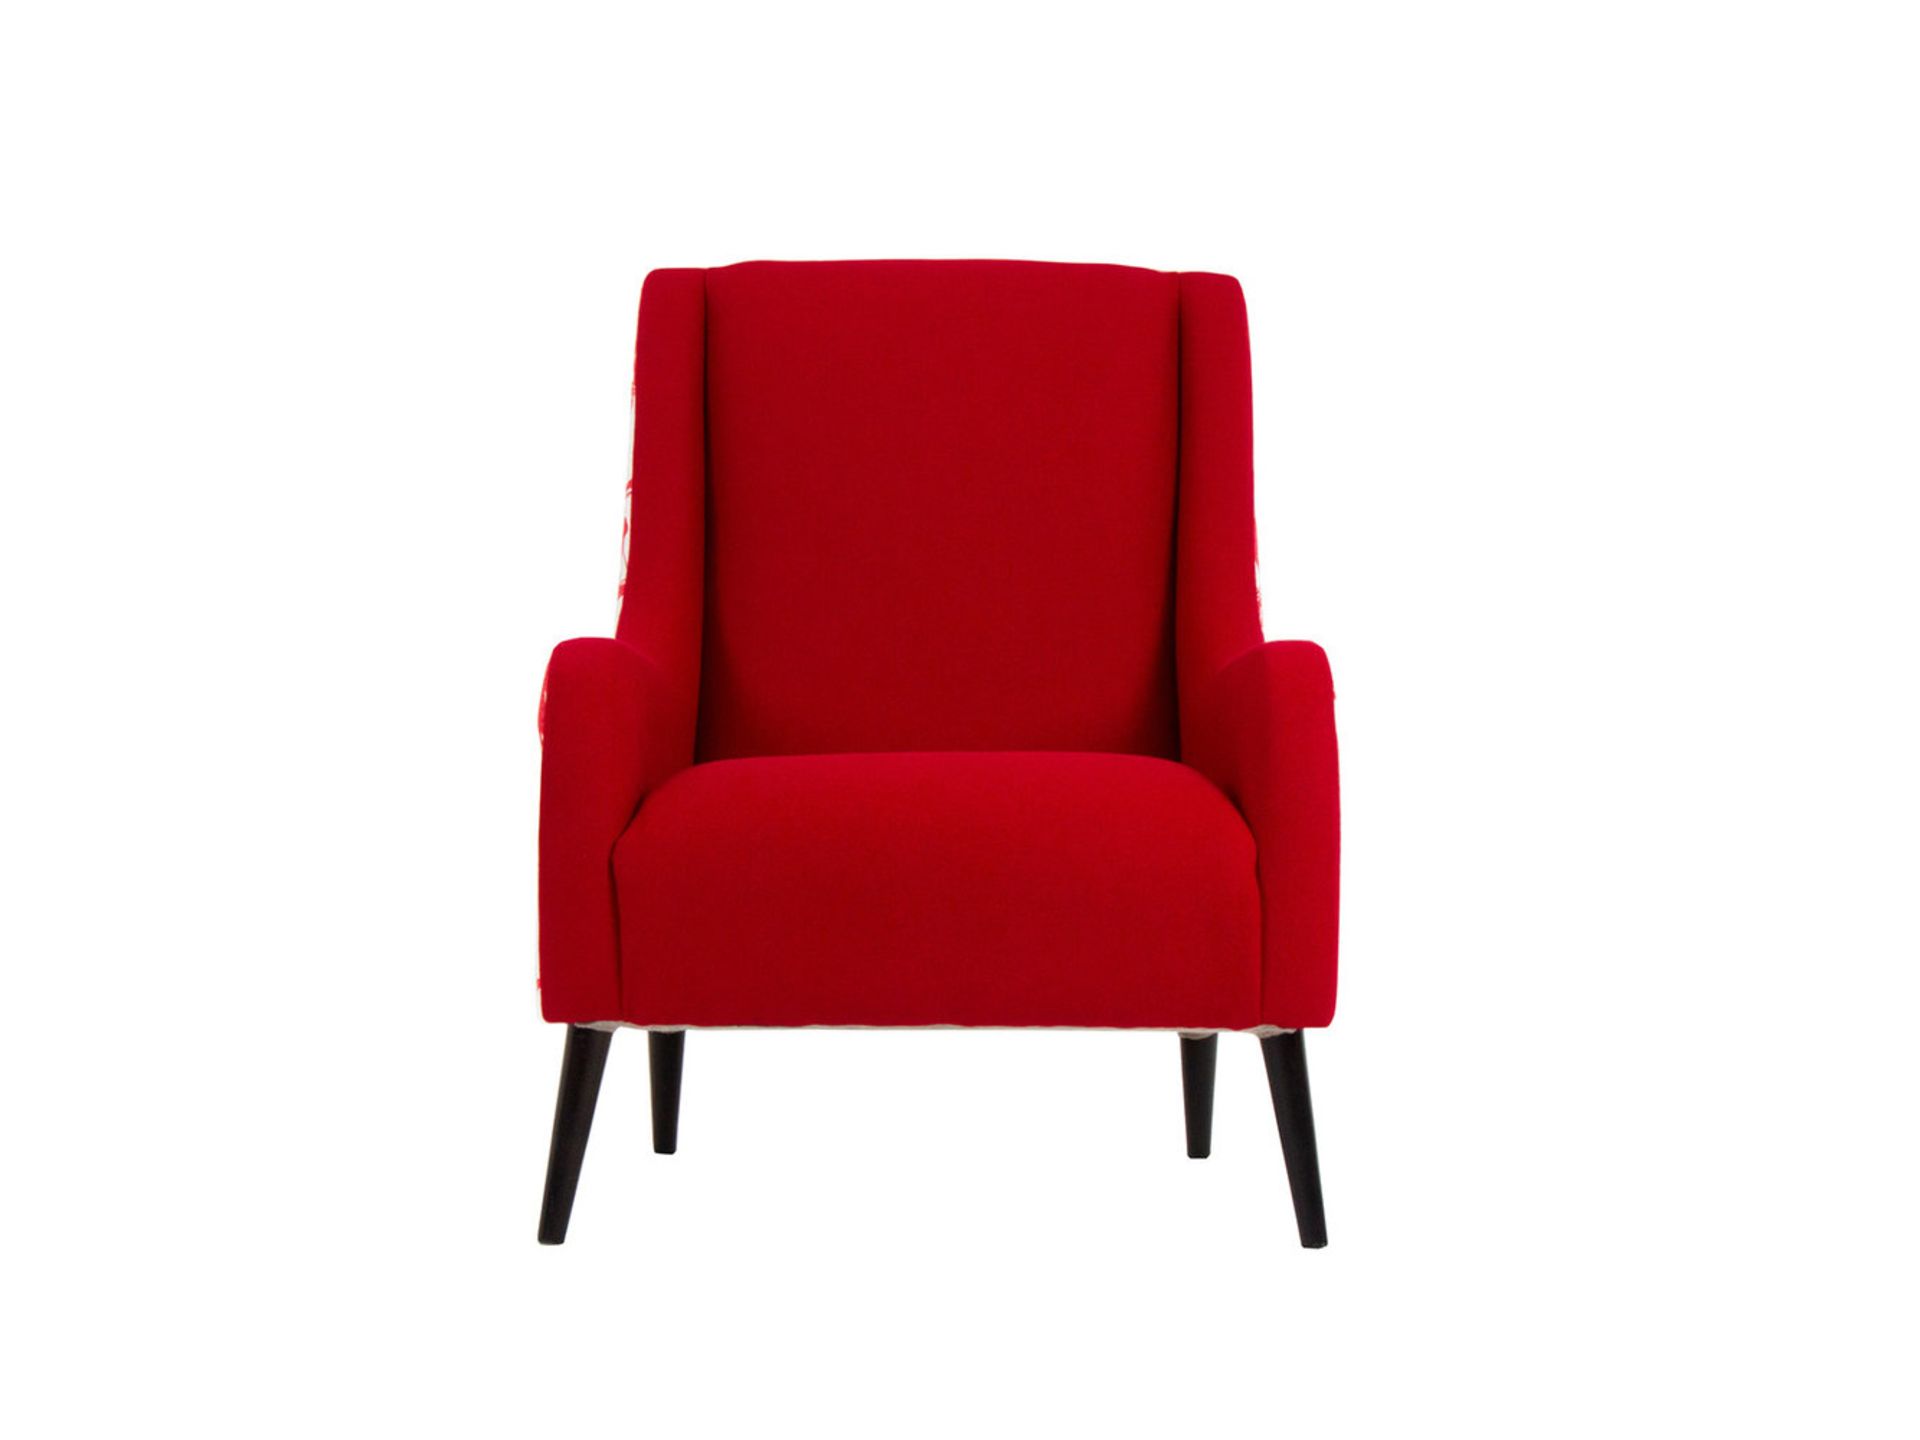 1 x Lauran Armchair Upholstered in Aviemore Skiing Fabric in Red and White - RRP £779! - Image 3 of 7